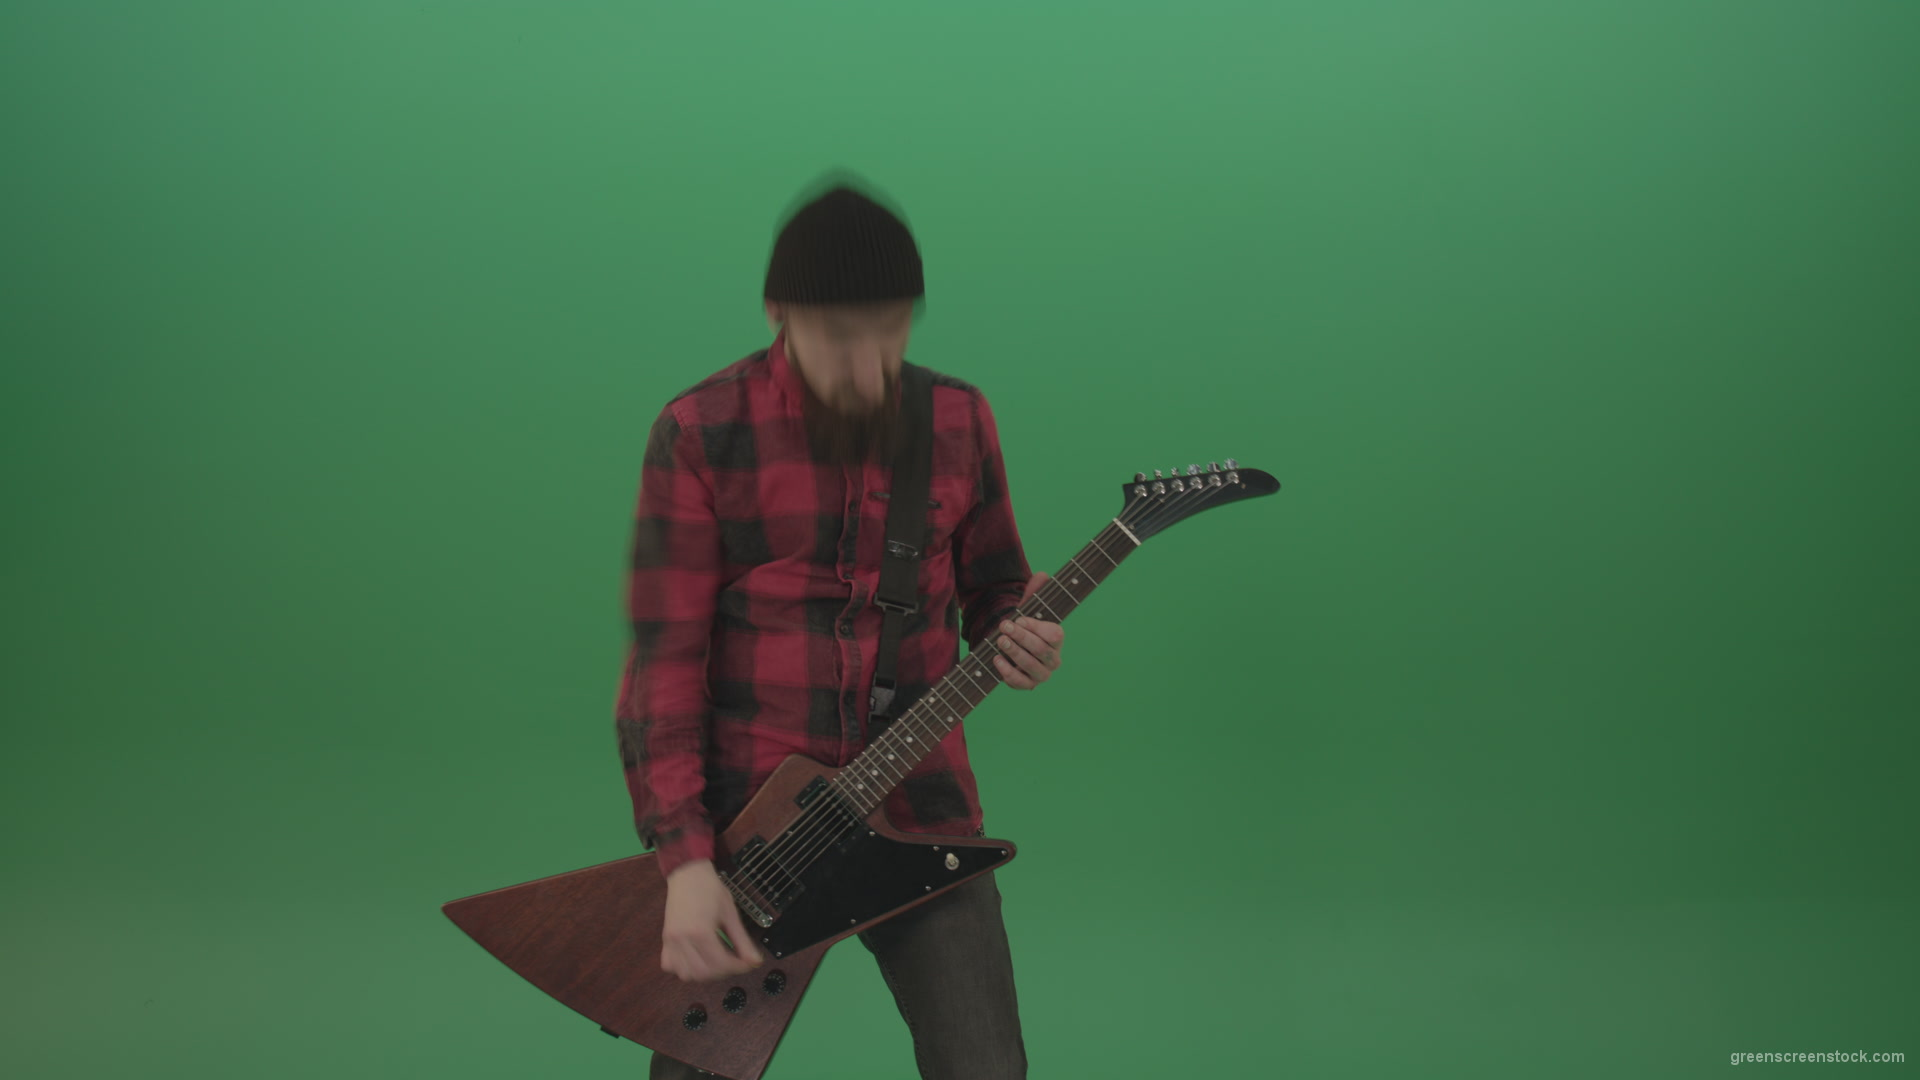 Old-man-with-beard-play-rock-guitar-isolated-on-green-screen-background-4K_008 Green Screen Stock